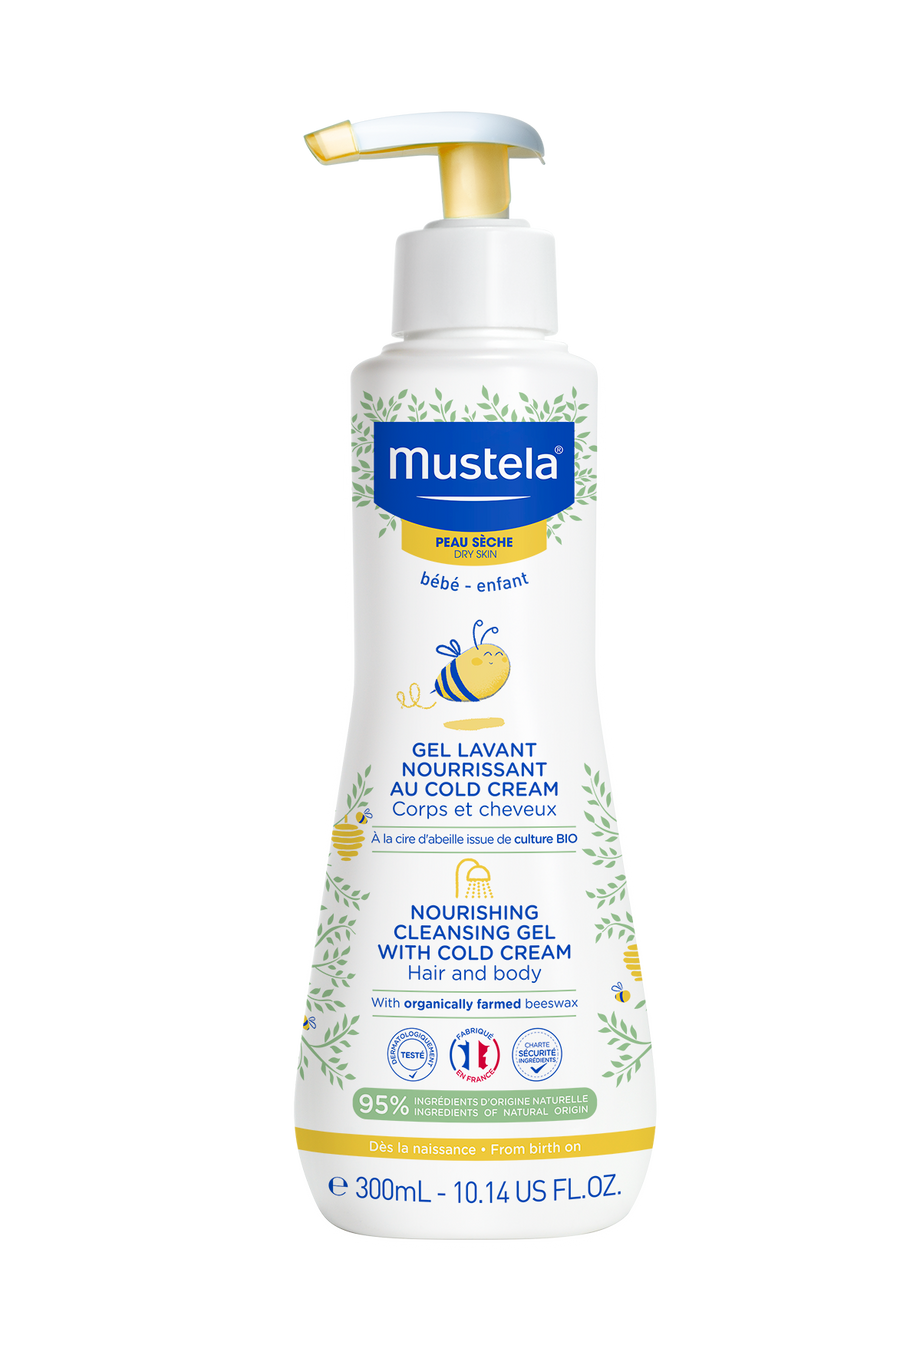 Mustela Nourishing Cleansing Gel with Cold Cream and Organic beeswax for Dry Skin (300ml)